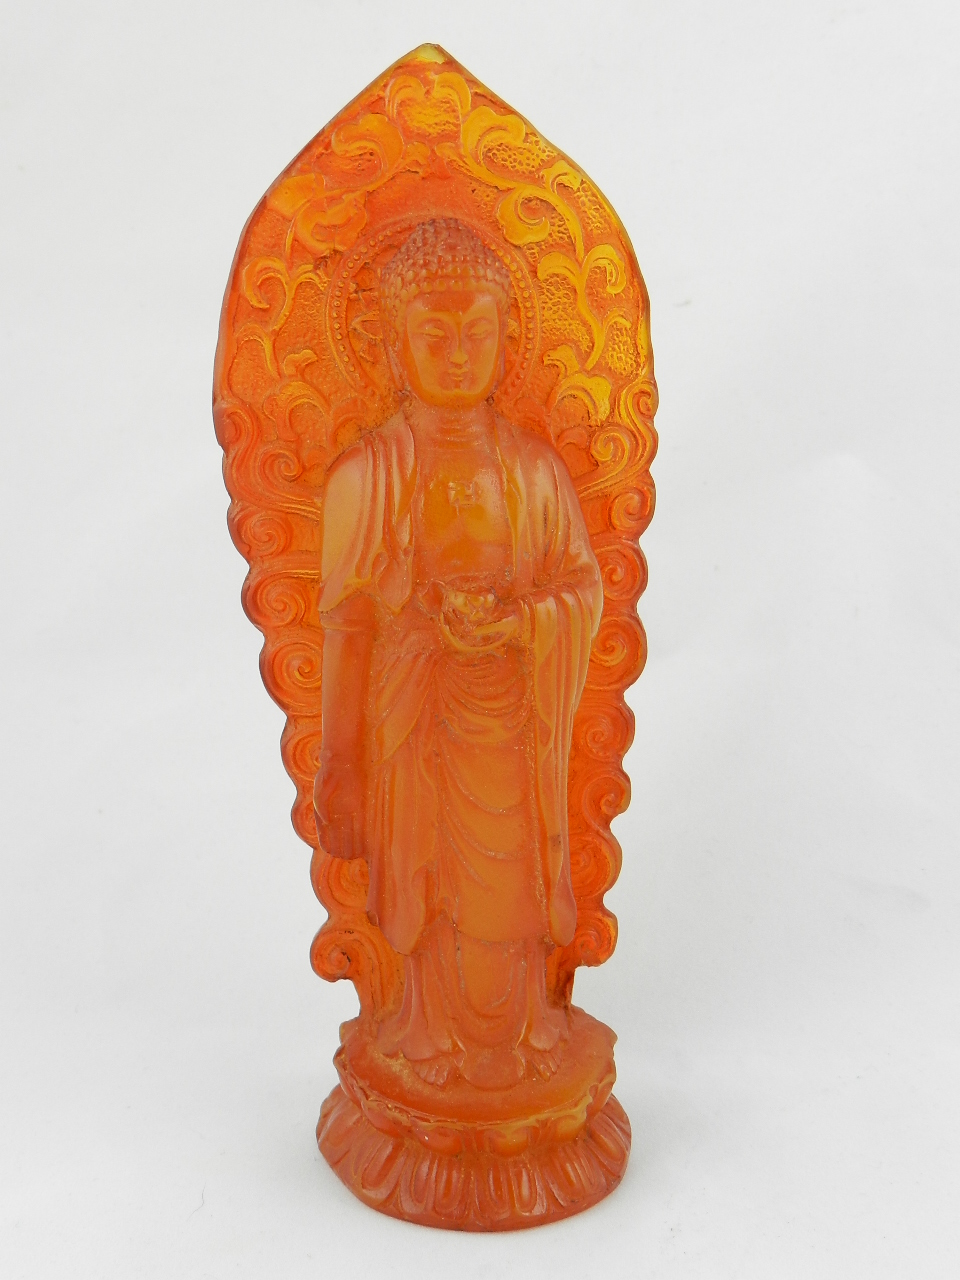 A reconstituted amber model of a standing Buddah